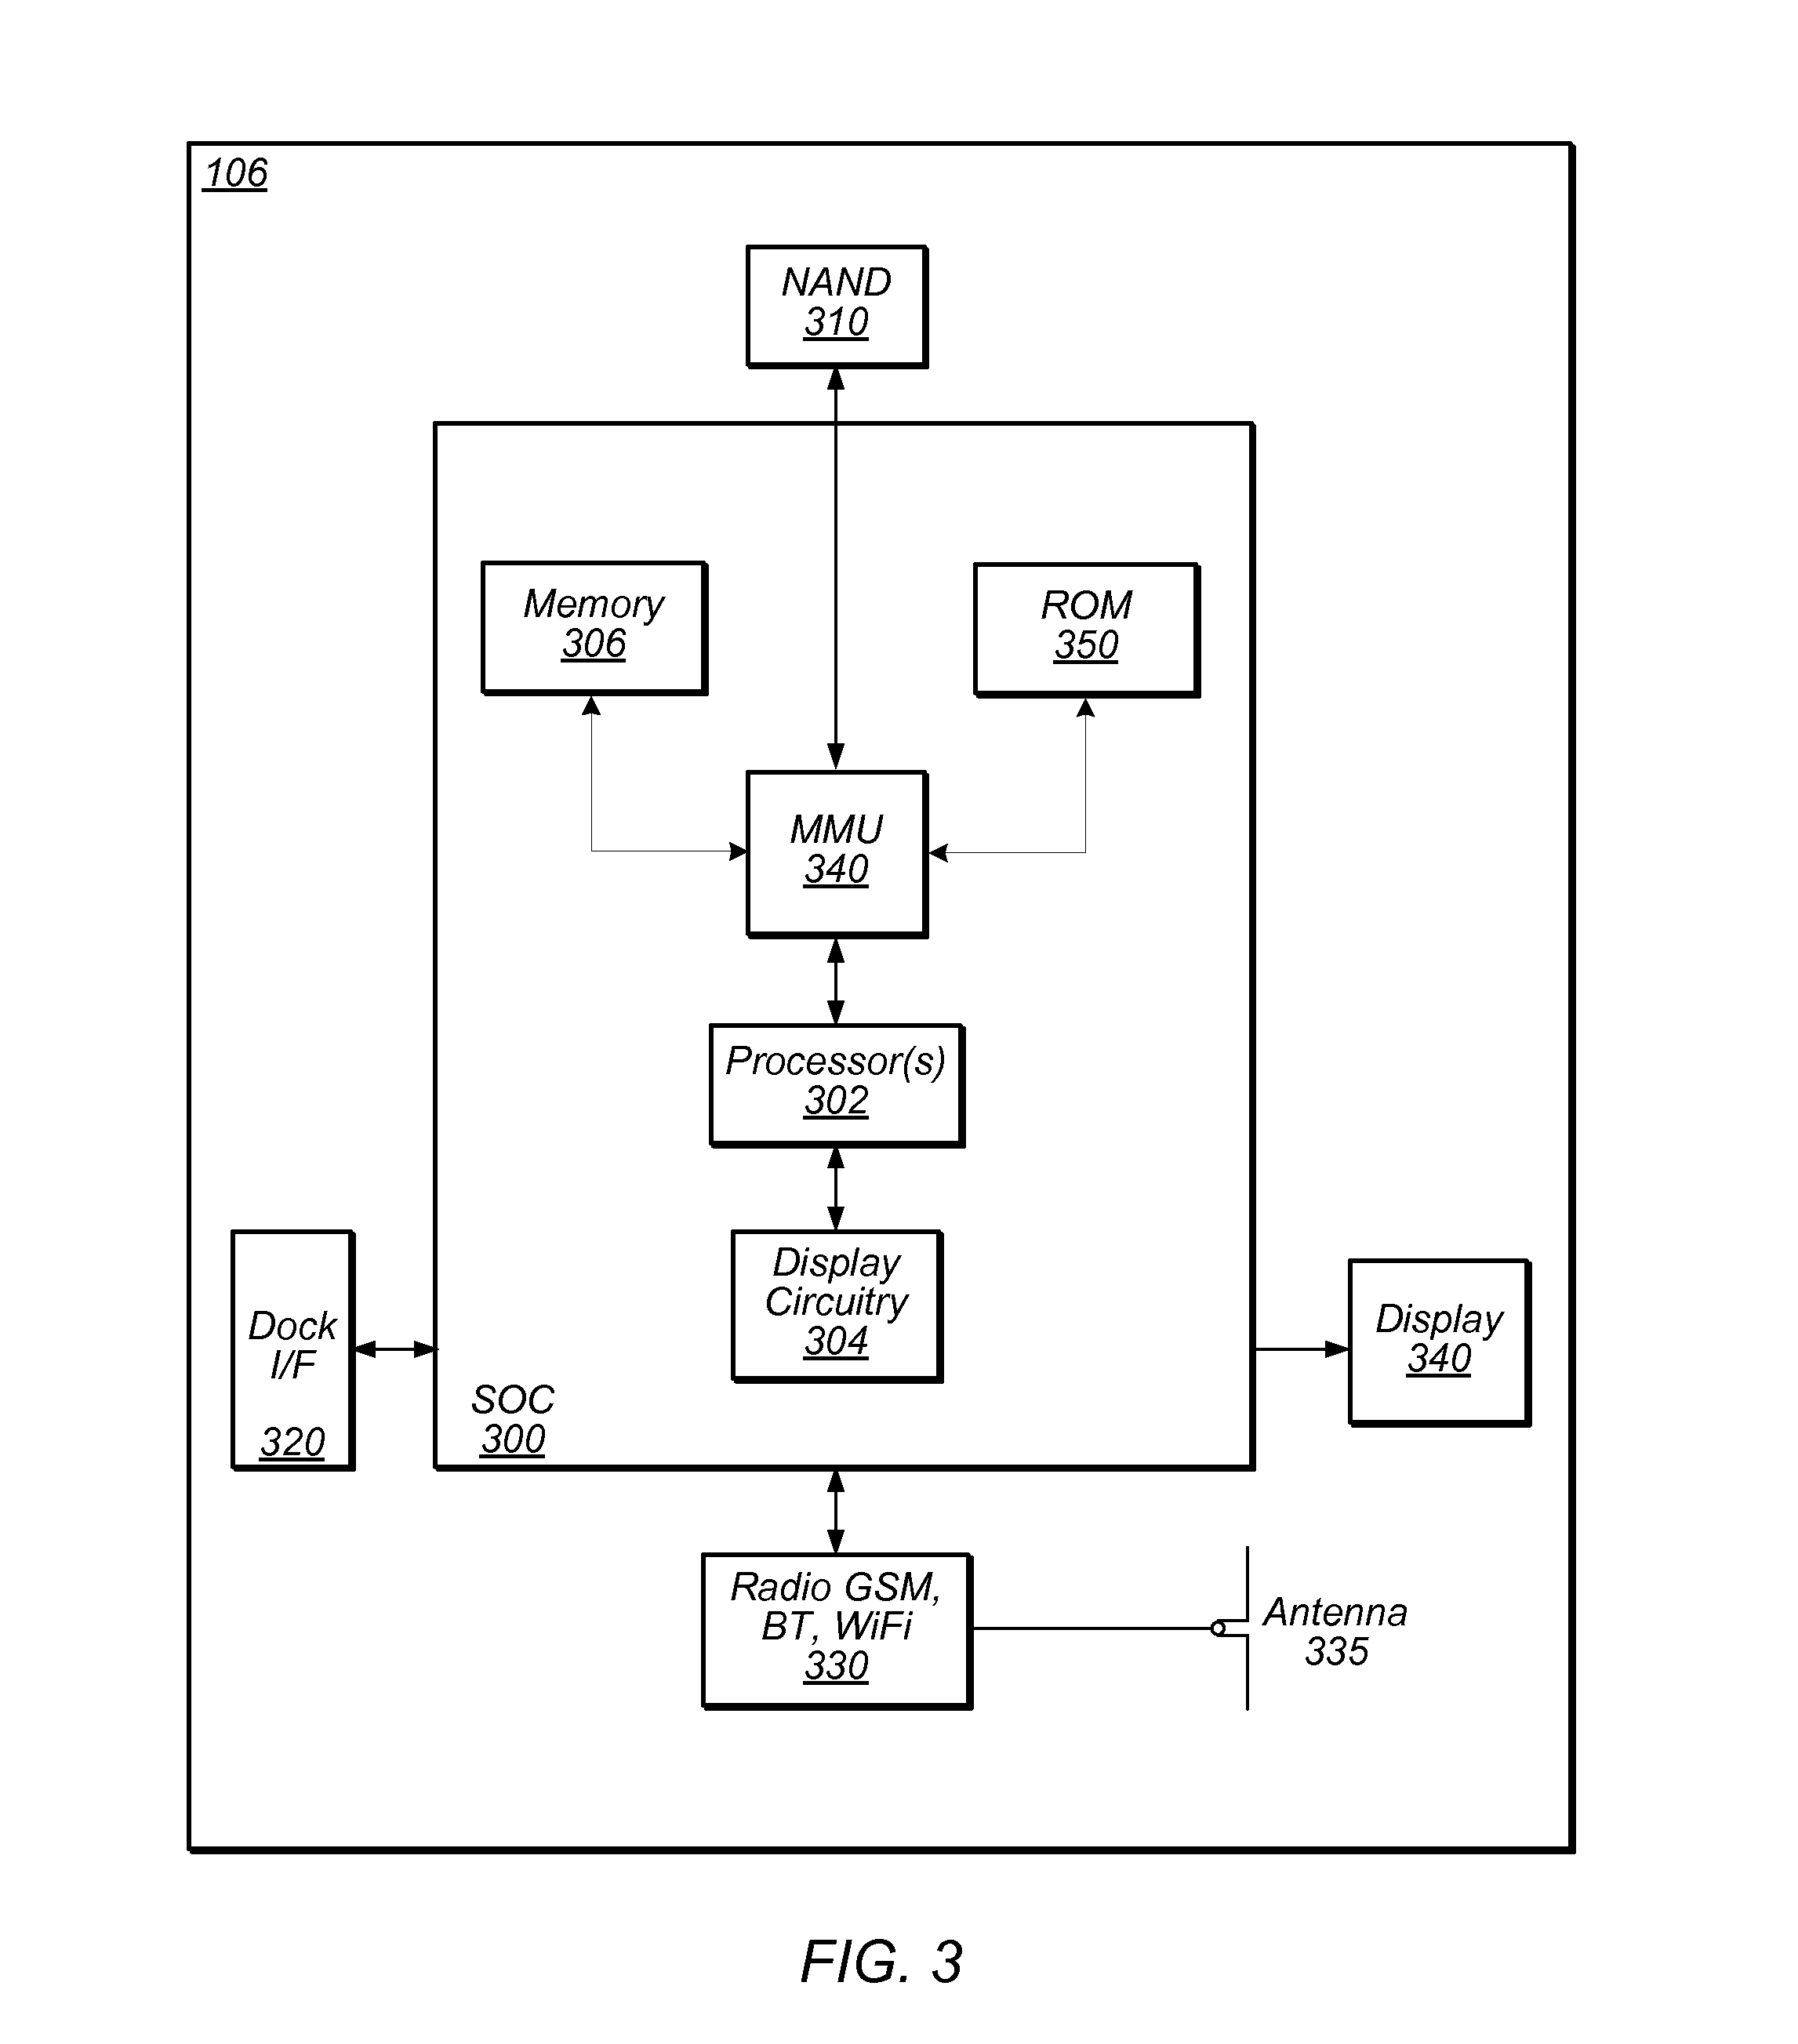 Distributed computing in a wireless communication system